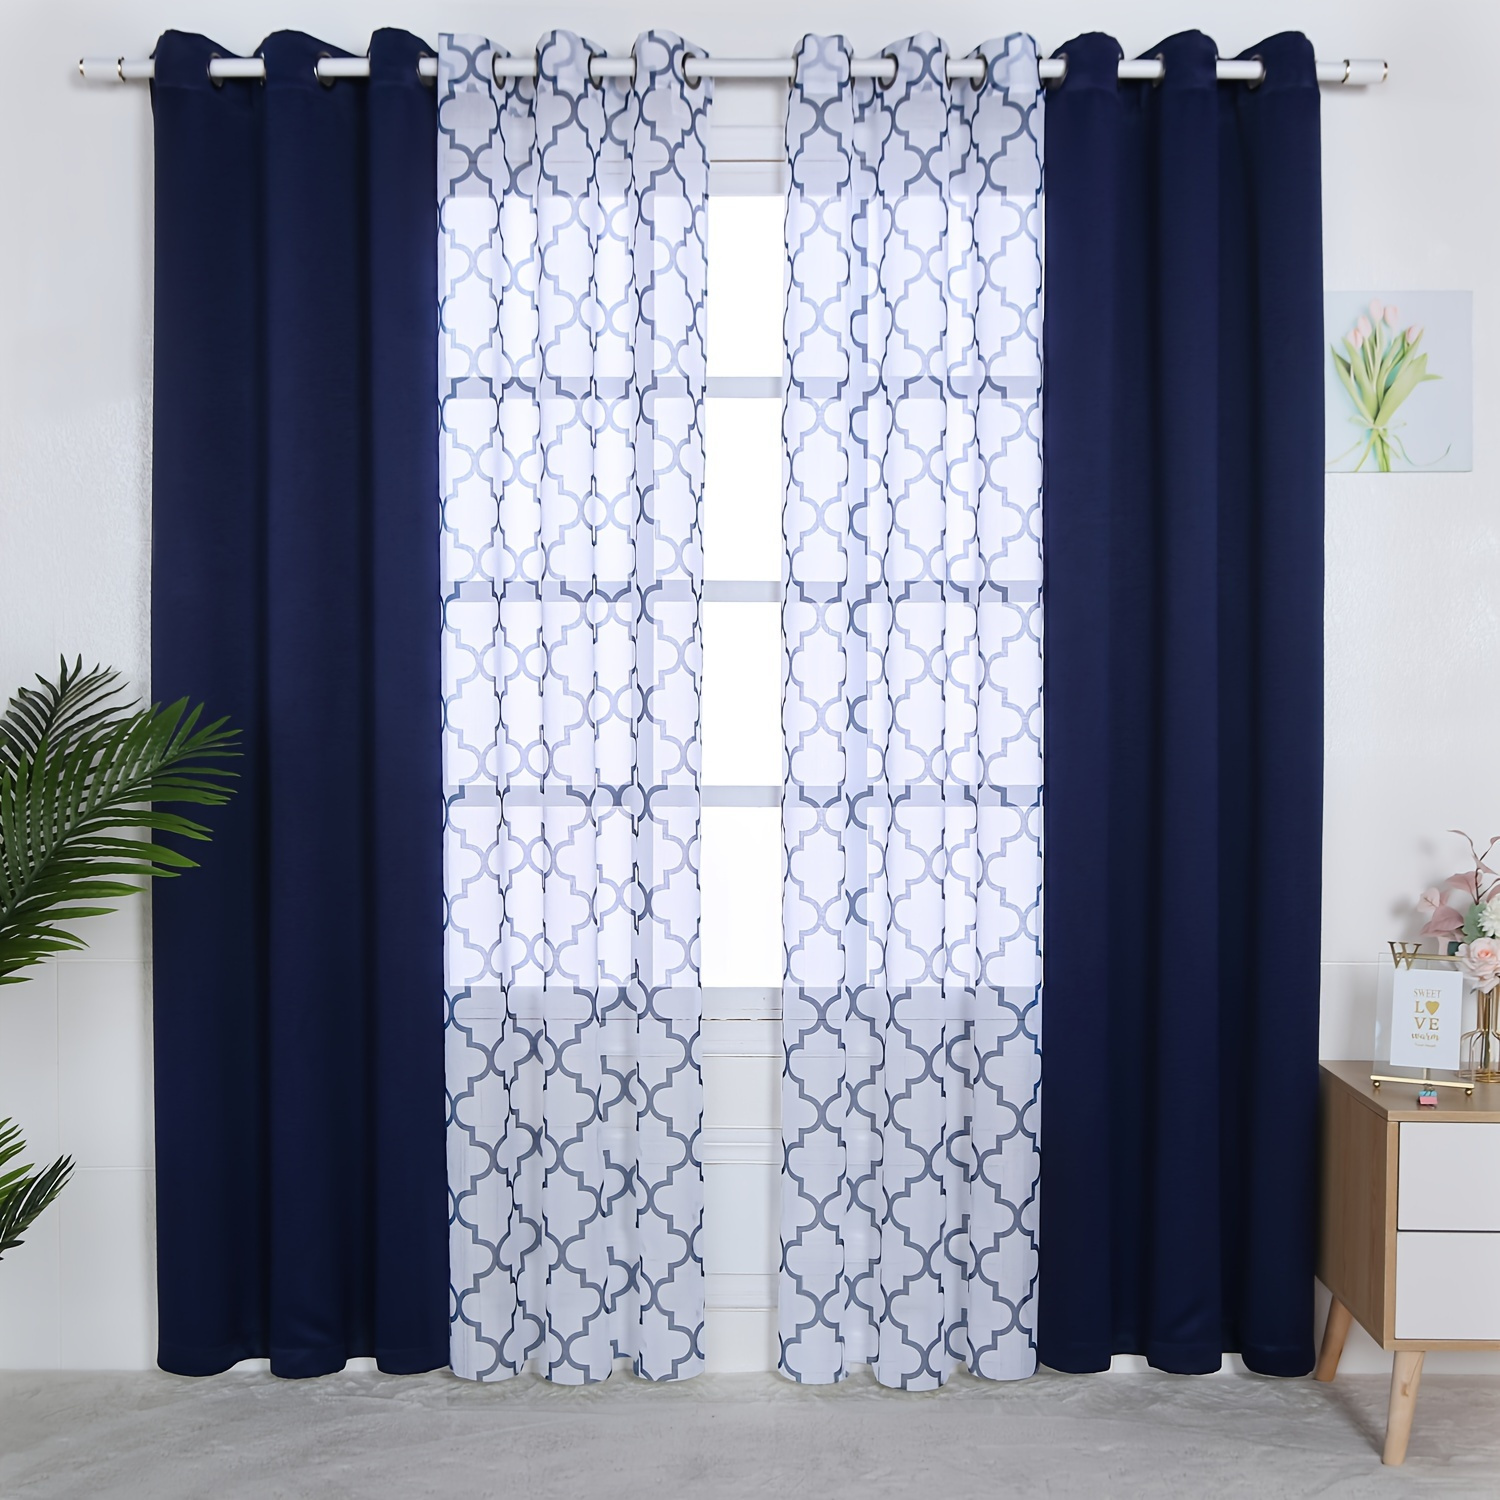 

4cps/set Curtains, 2cps Moroccan Print Sheer Curtains And 2pcs Blackout Curtains For Bedroom, Living Room Grommet Window Drapes Office Home Decor